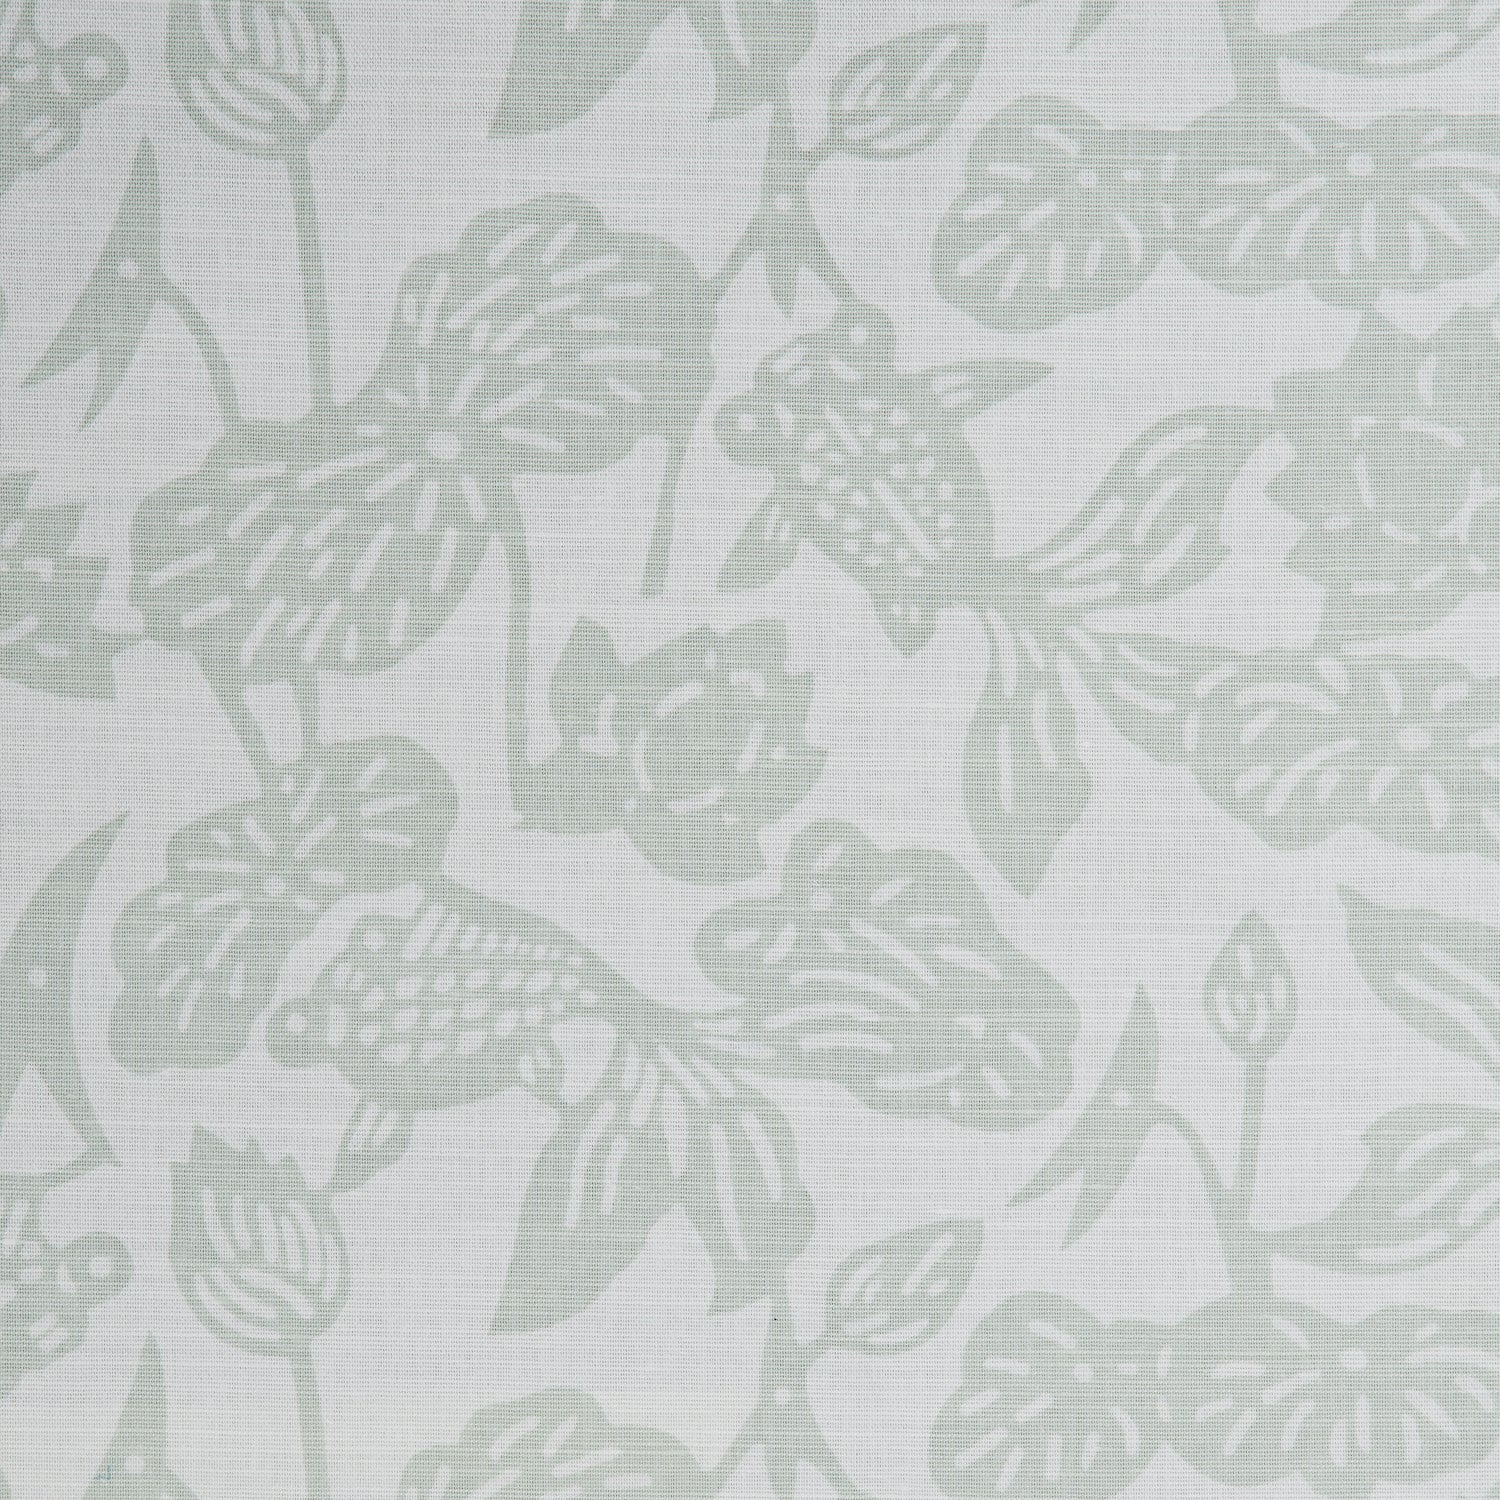 Detail of a cotton fabric in a repeating fish and leaf pattern in light green on a gray field.